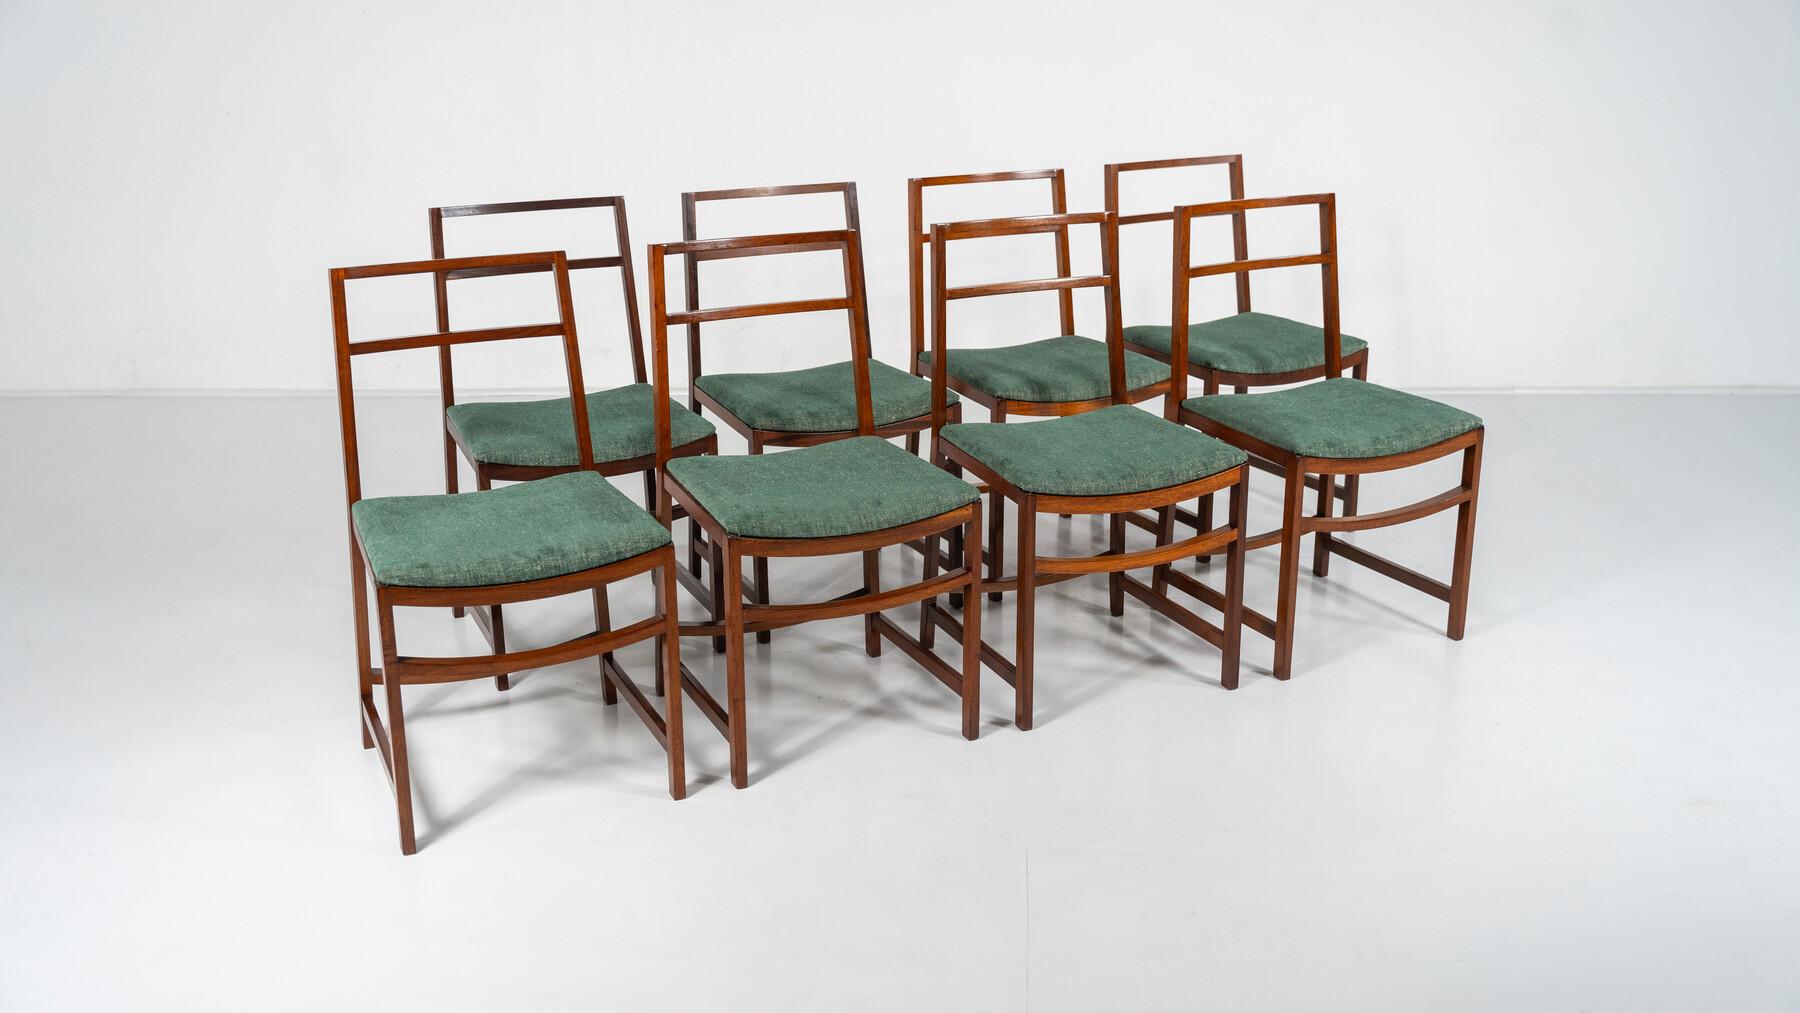 Set of 8 Mid-Century Modern Dining Chairs by Renato Venturi for MIM, 1950s For Sale 15